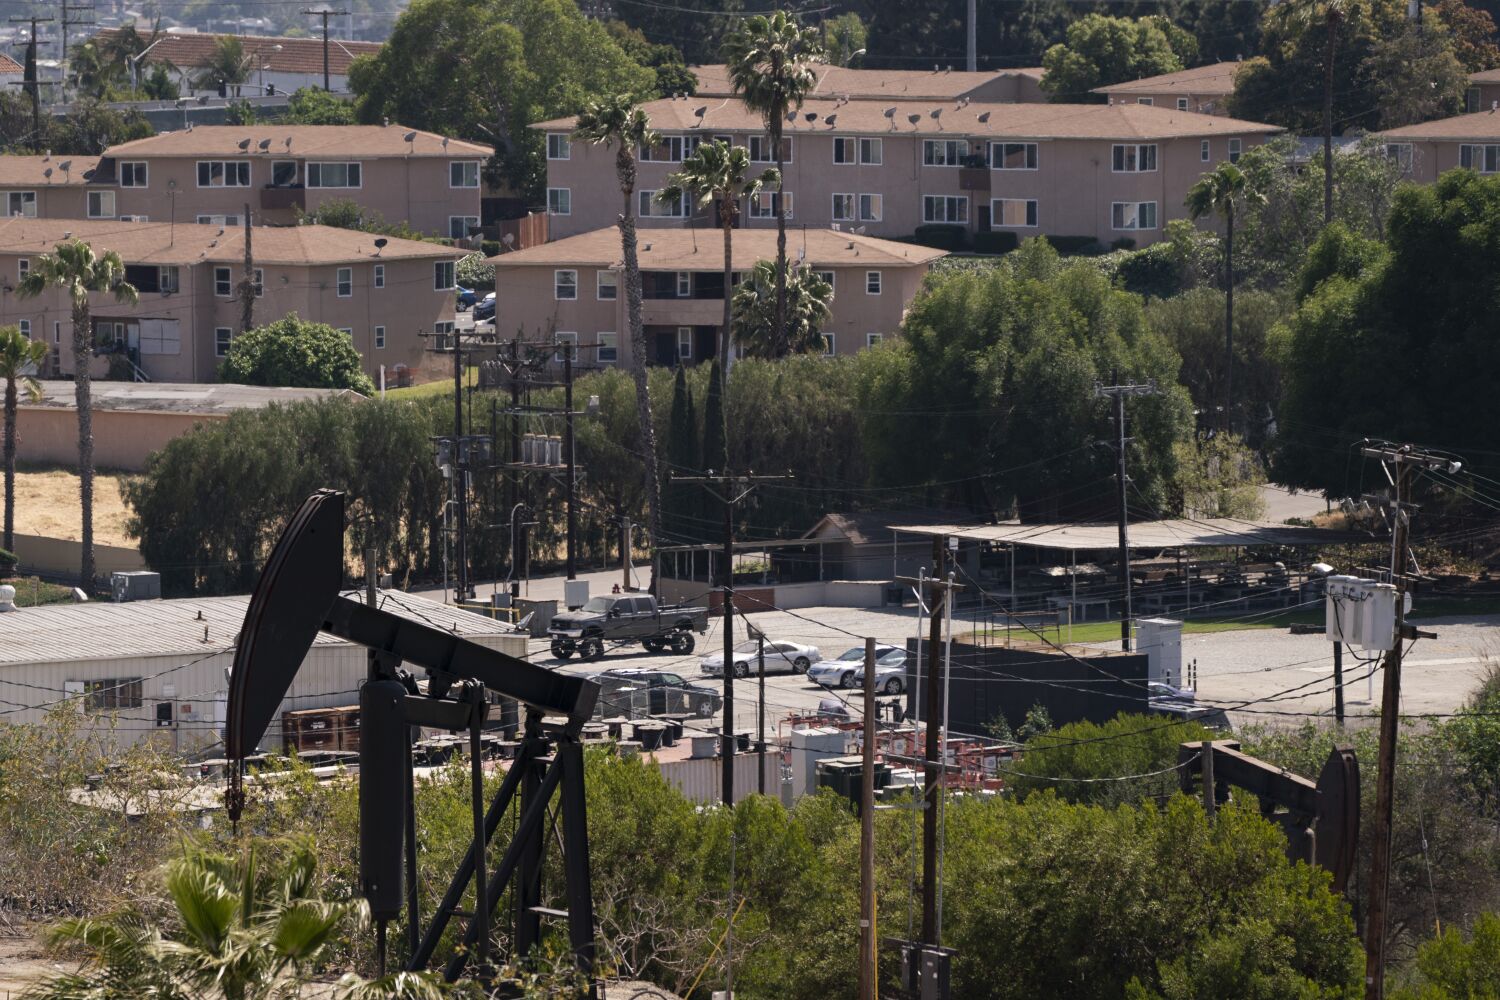 Opinion: I grew up next to an L.A. oil well. California can protect others from what I went through